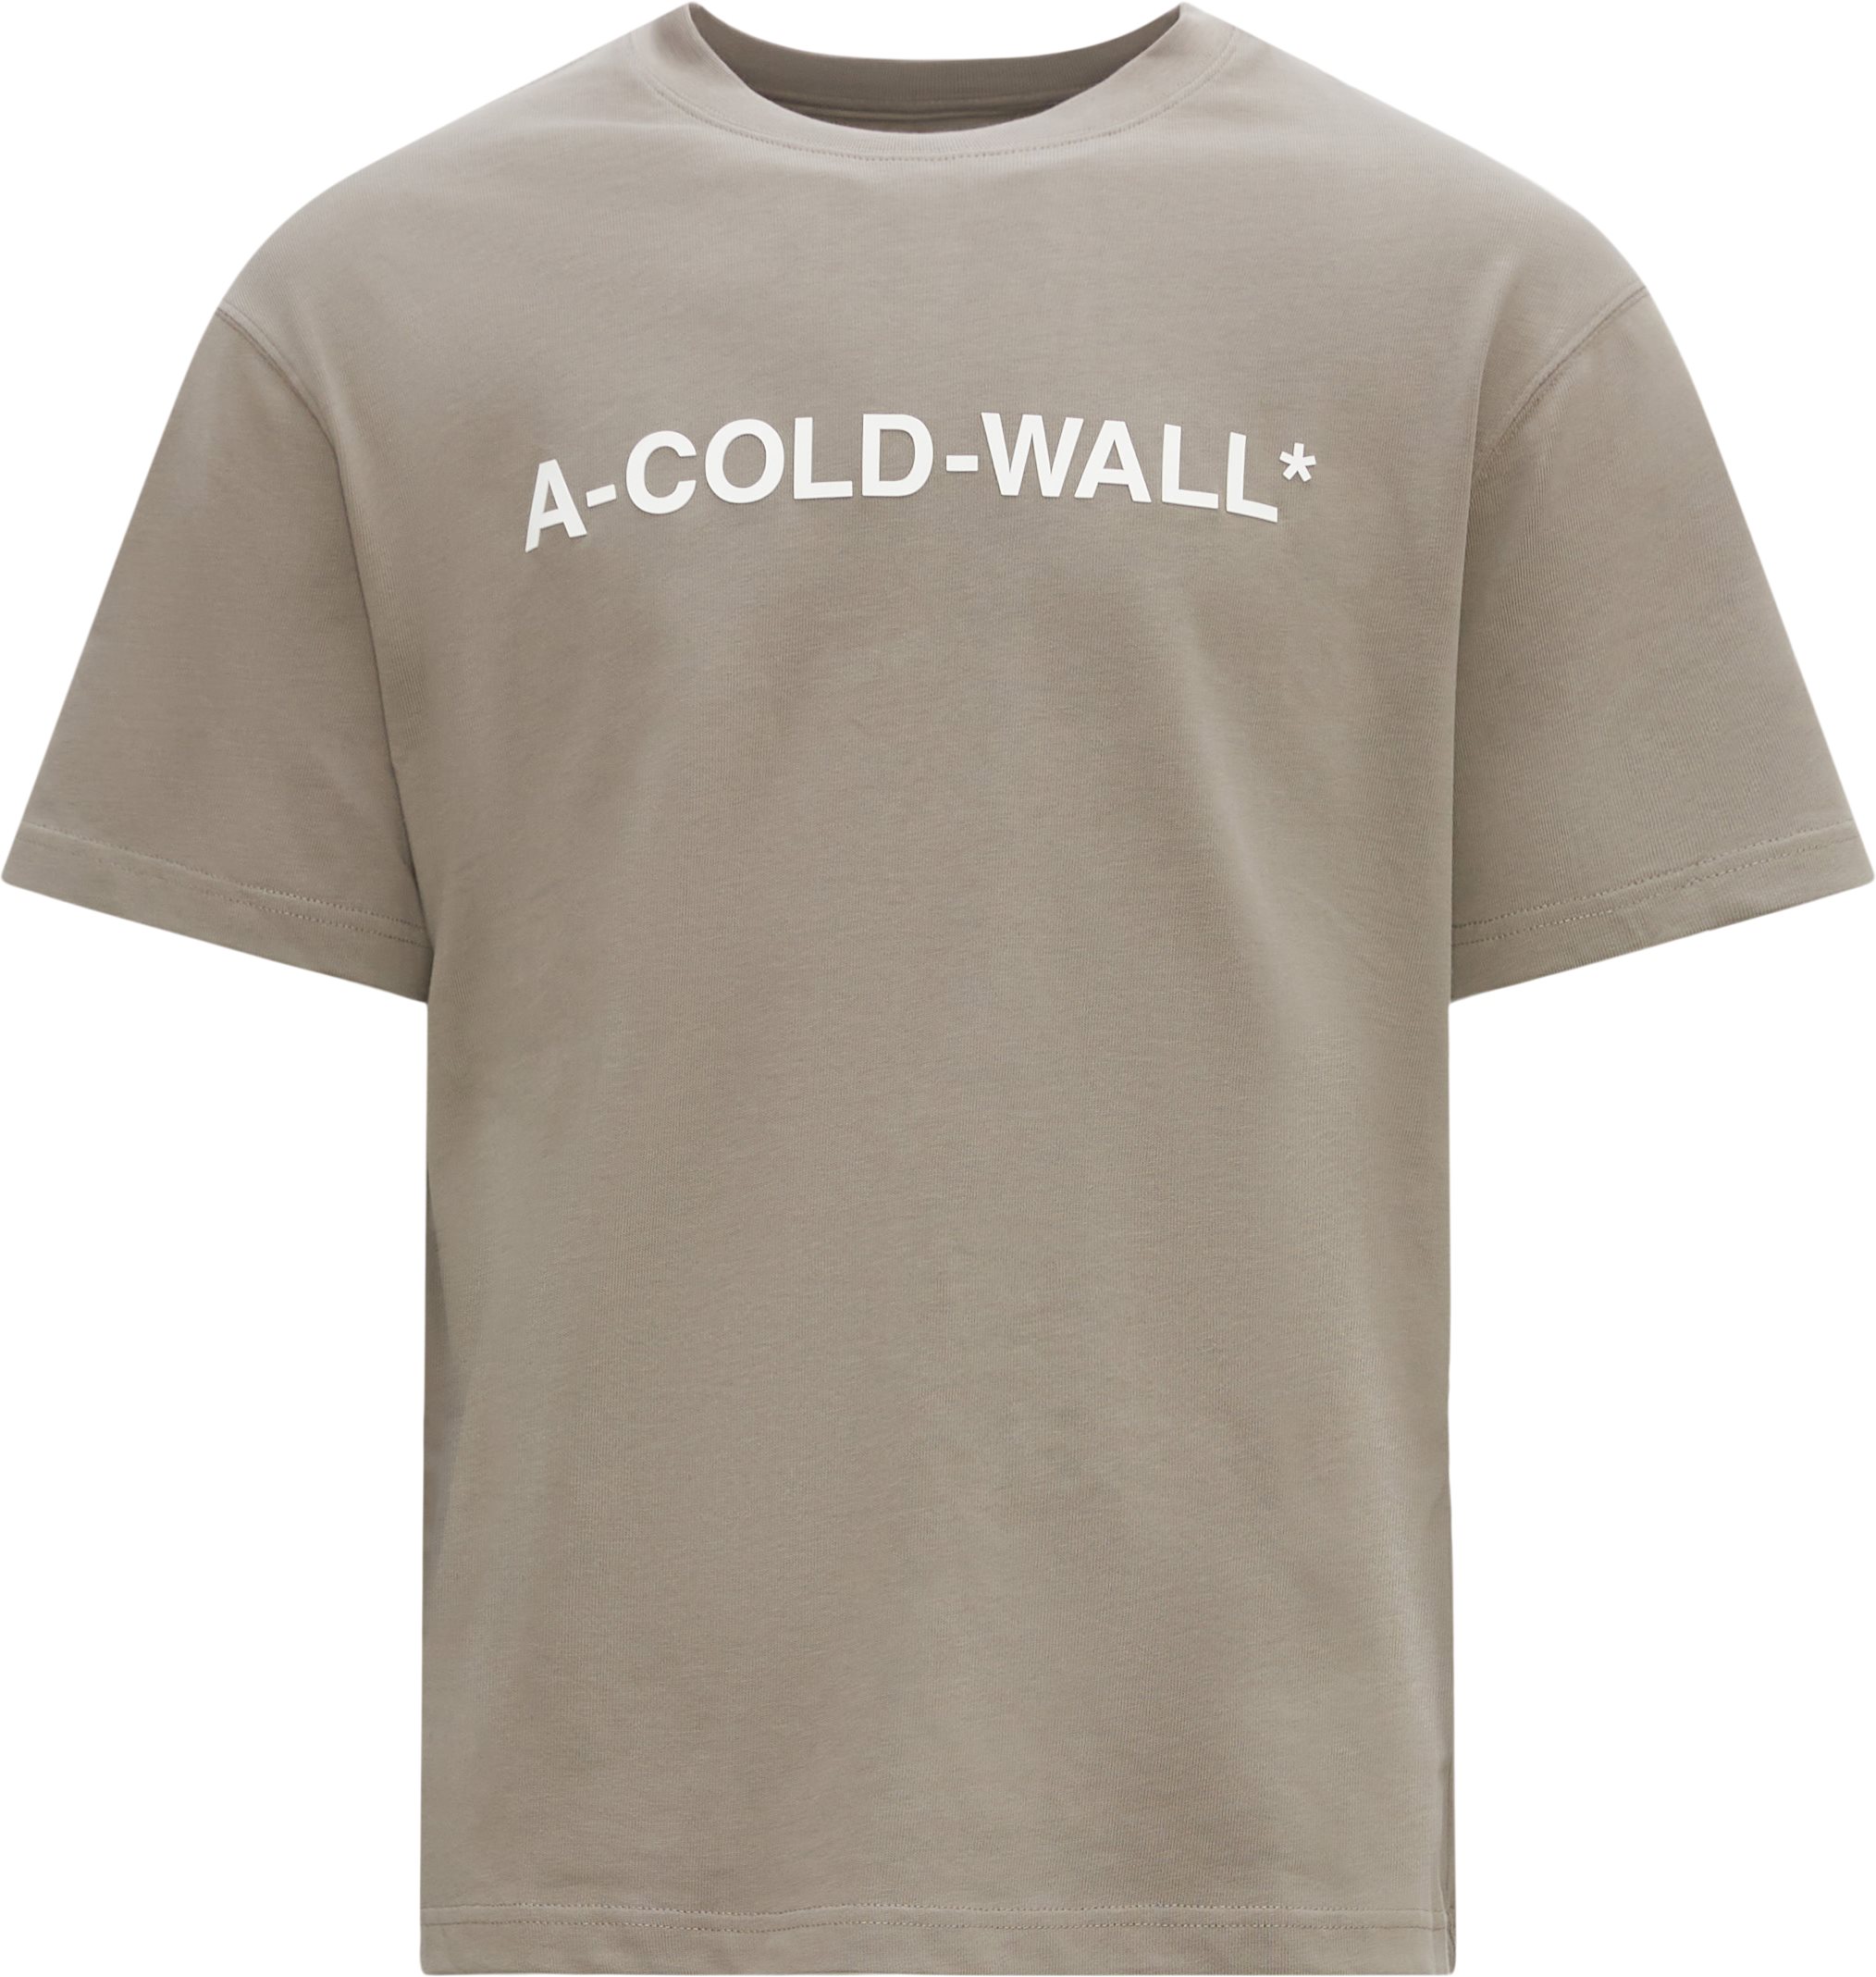 A-COLD-WALL* | Shop A-COLD-WALL* sweatshirts online